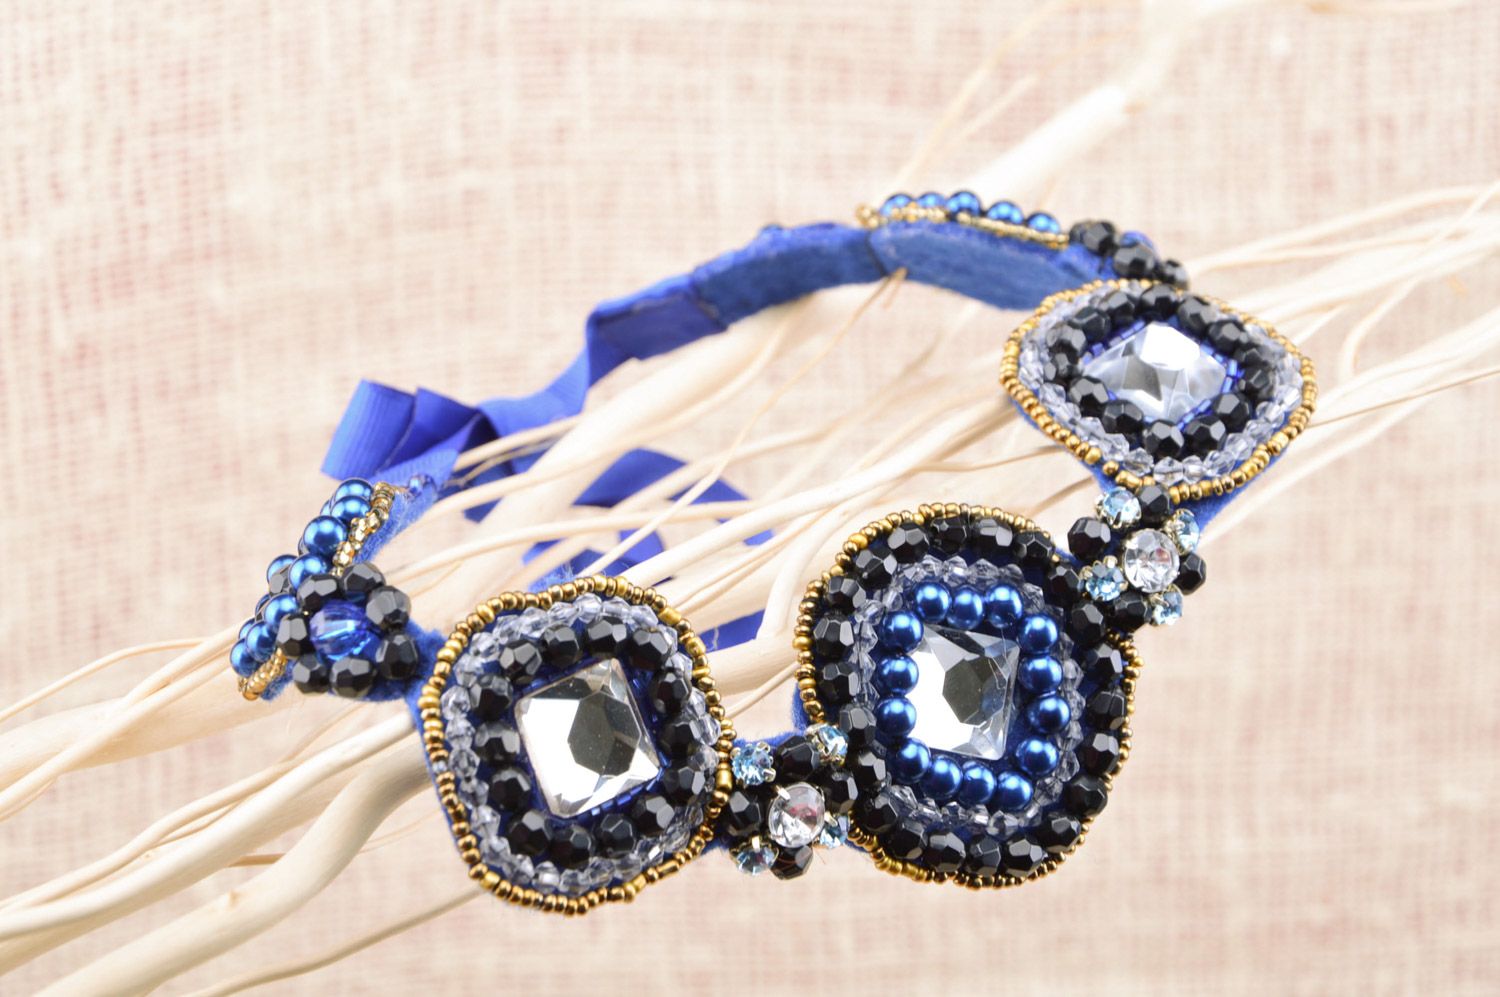 Elegant handmade bead embroidered collar necklace in blue colors 1001 nights photo 5